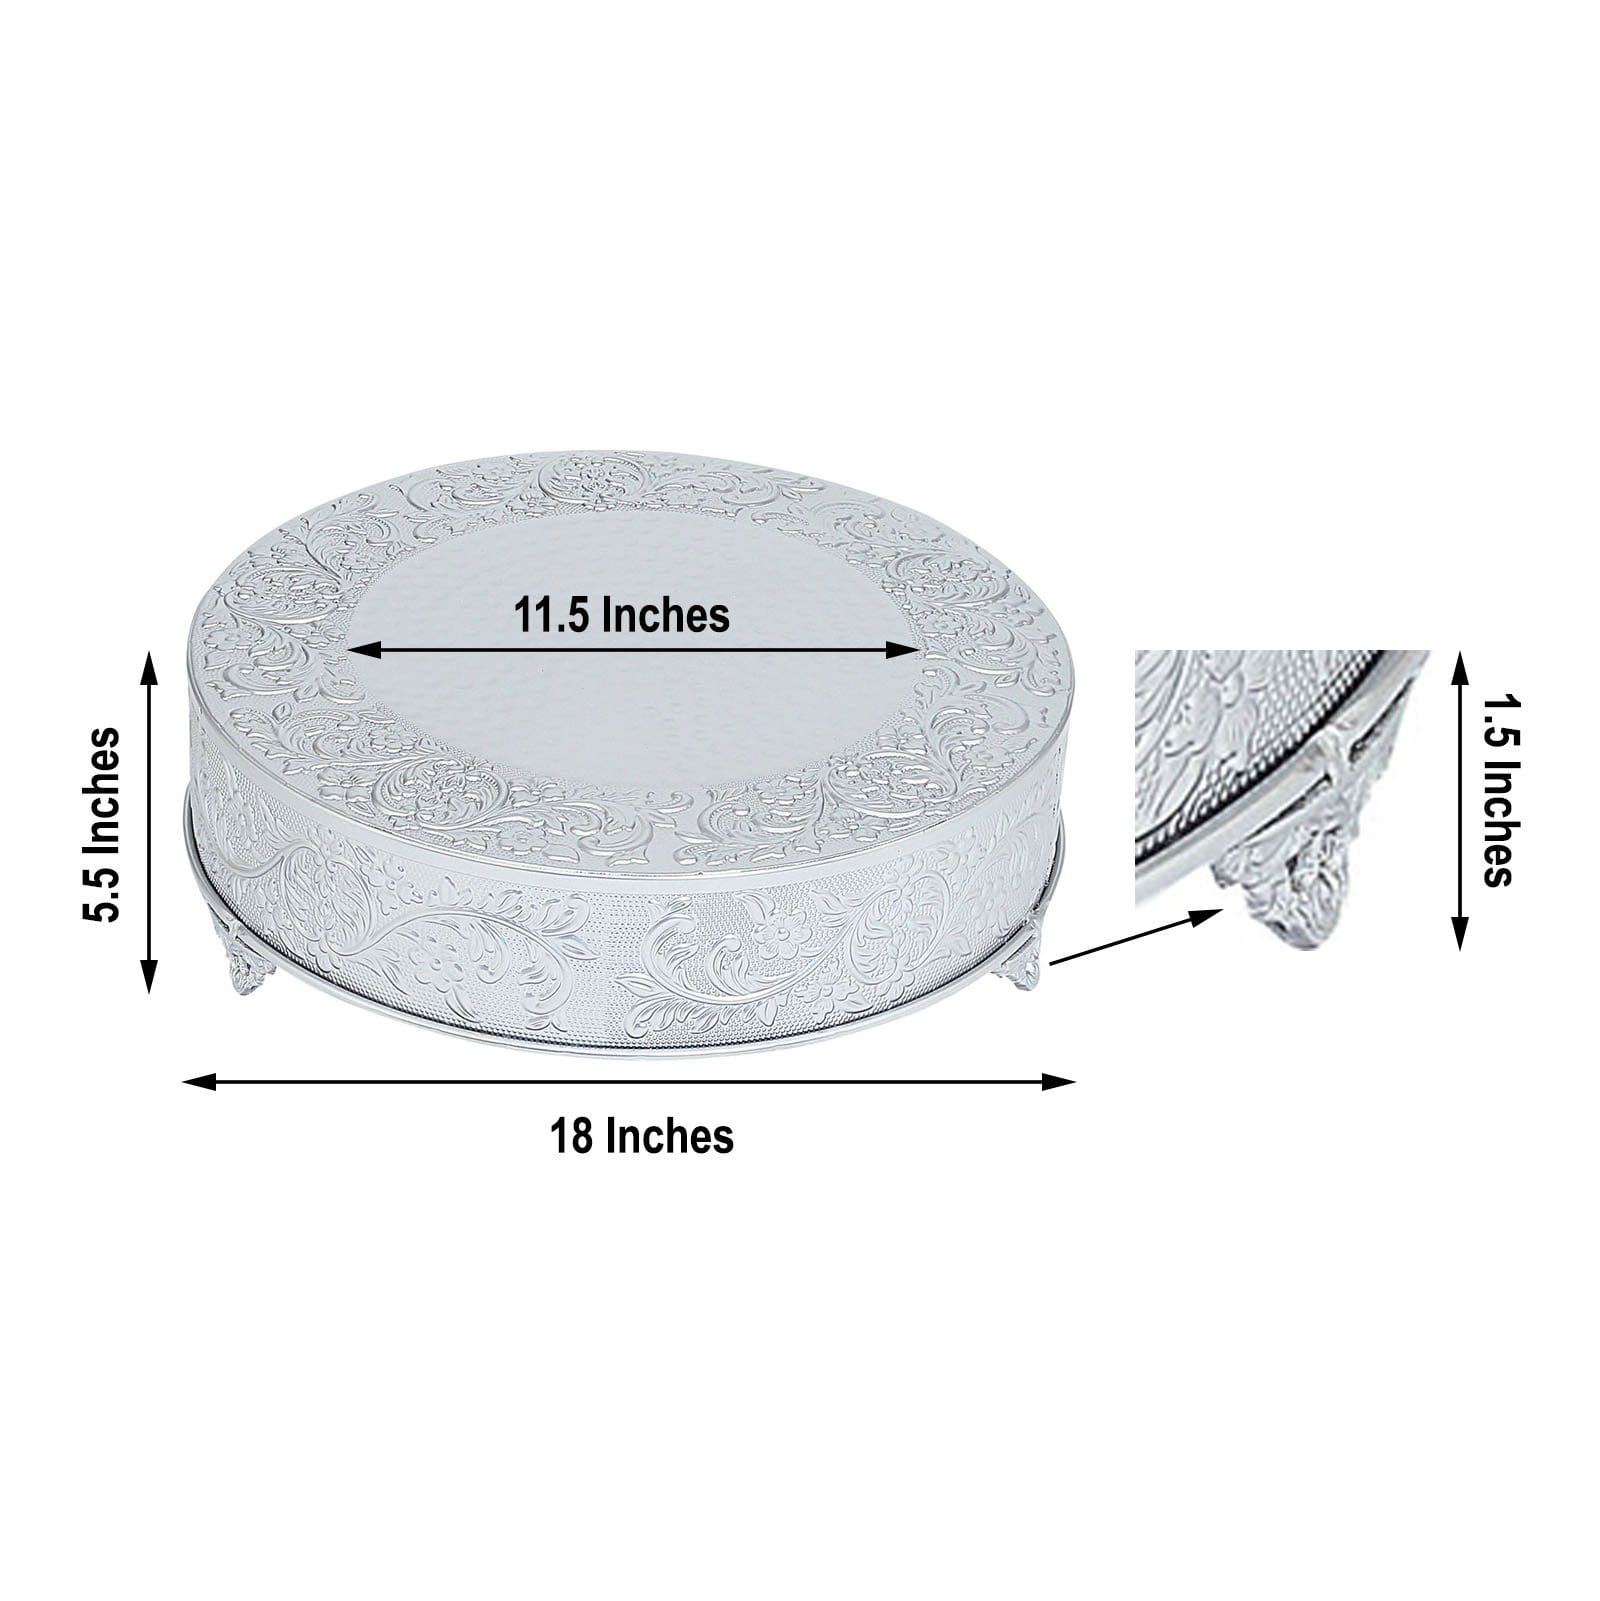 18 in wide Round Embossed Wedding Cake Stand Riser